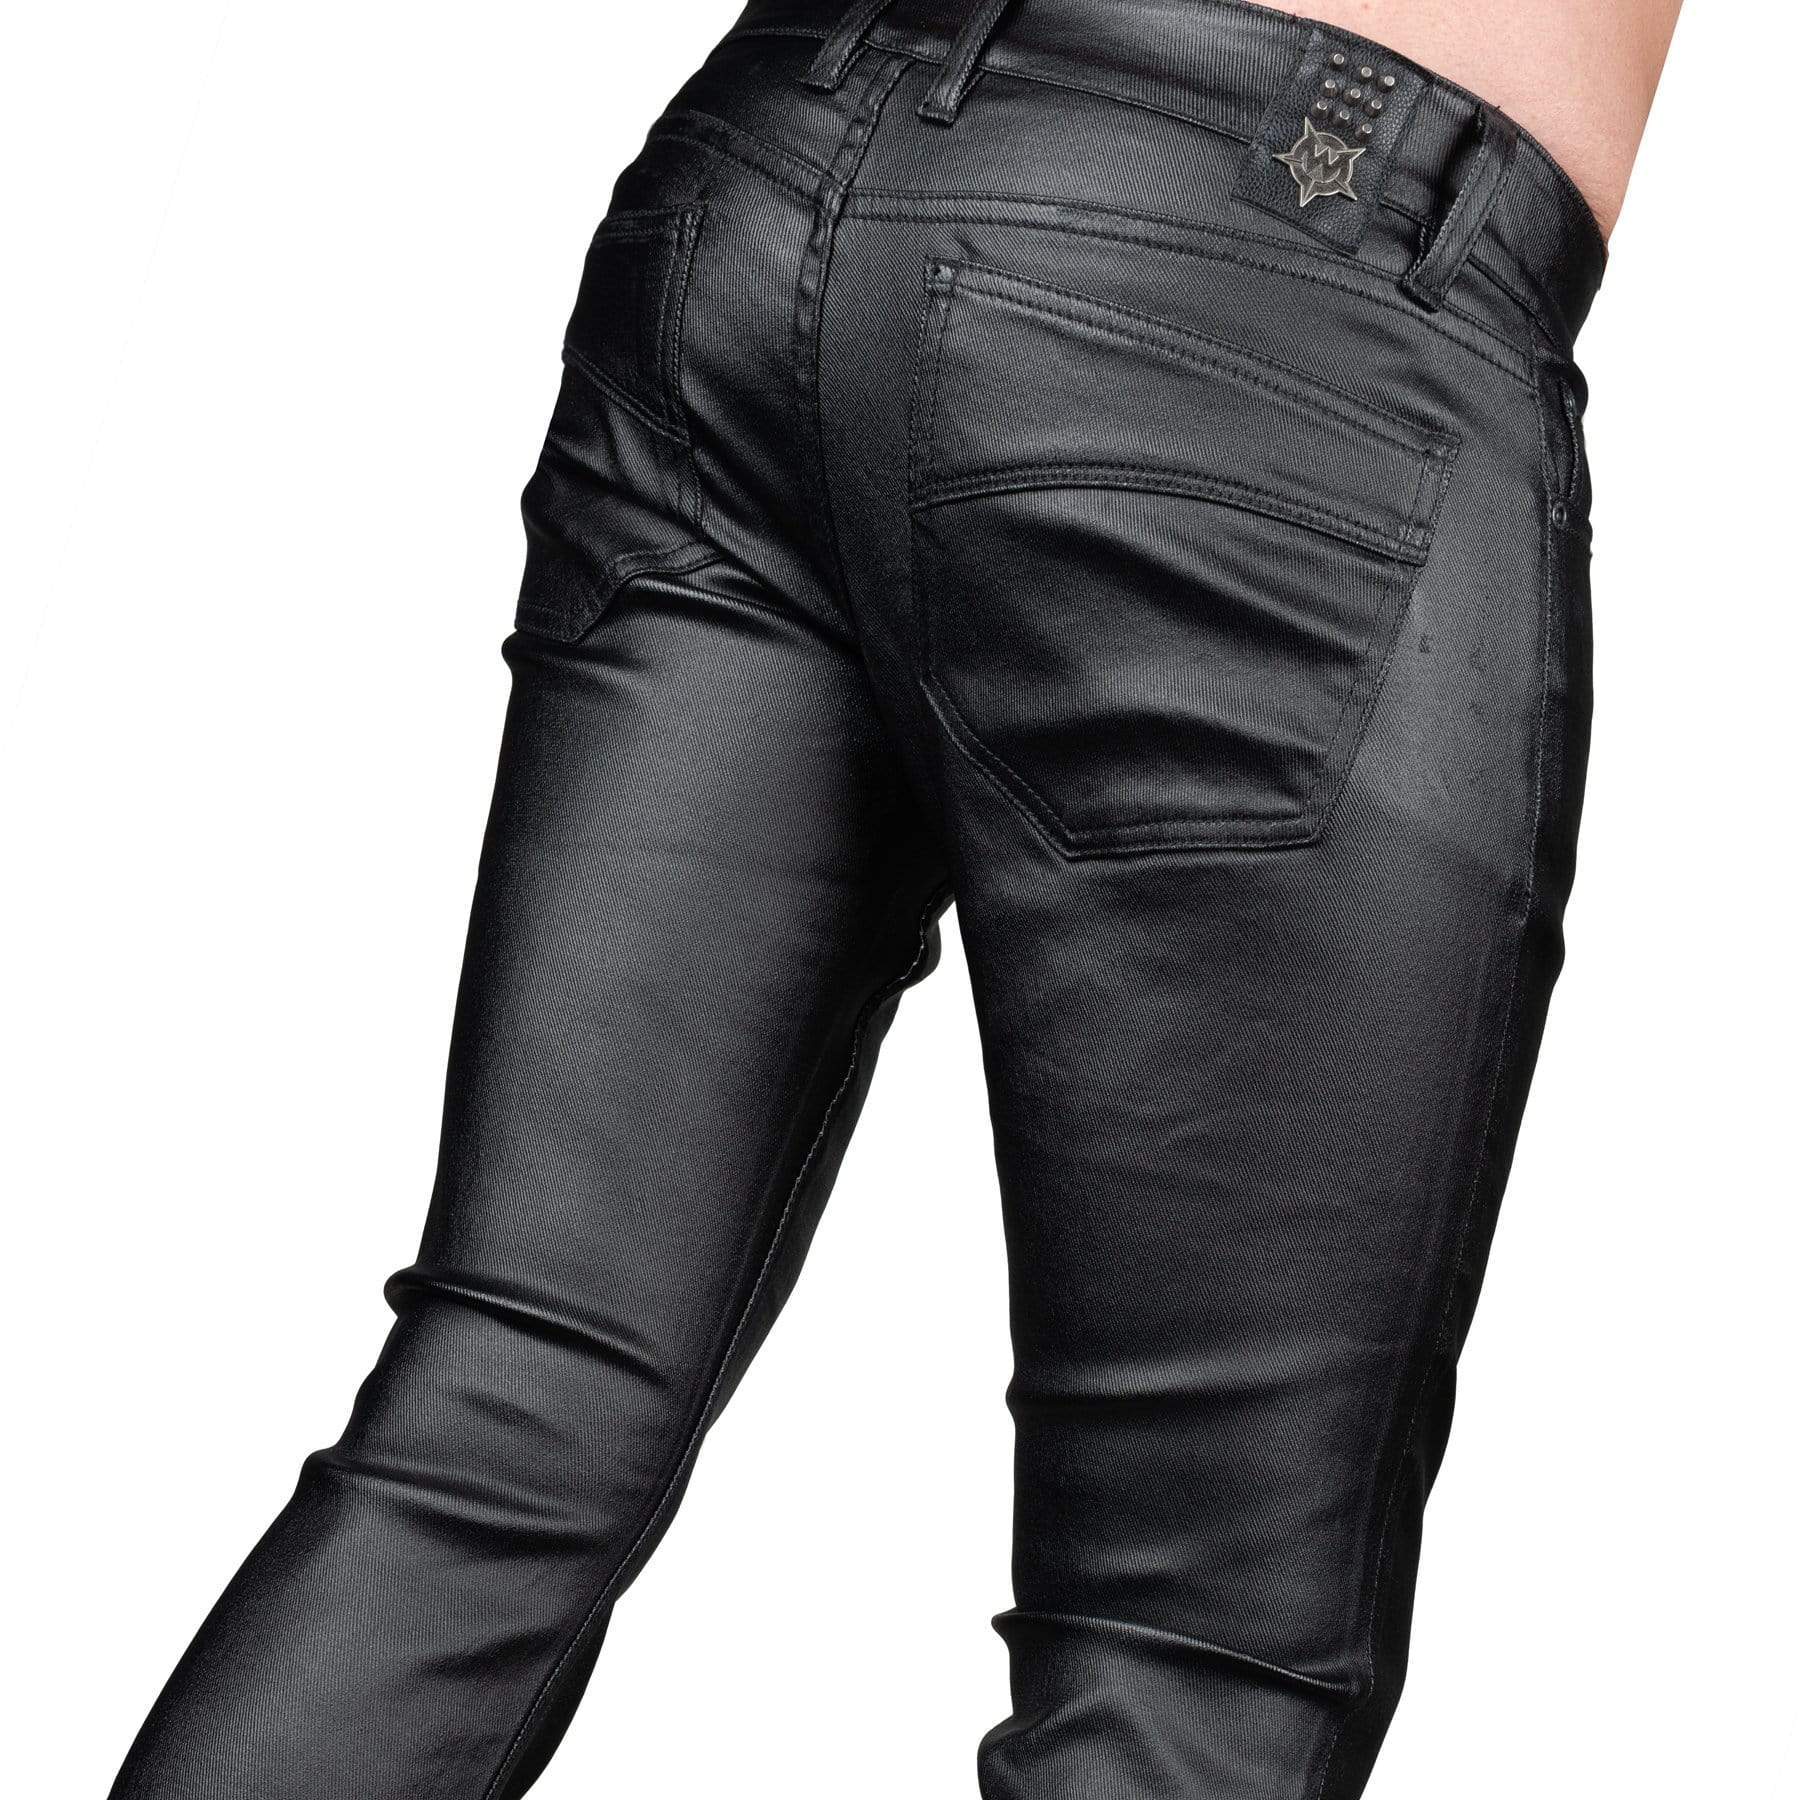 Order your G-Star RAW Revend 3D Dark Wax coated Jeans online at  subwear-co-za.myshopify.com Today. Shop Now! Think Jeans. Think  subwear-co-za.myshopify.com. Shop your favourite G-Star RAW Jeans at  subwear-co-za.myshopify.com. subwear-co-za.myshopify ...